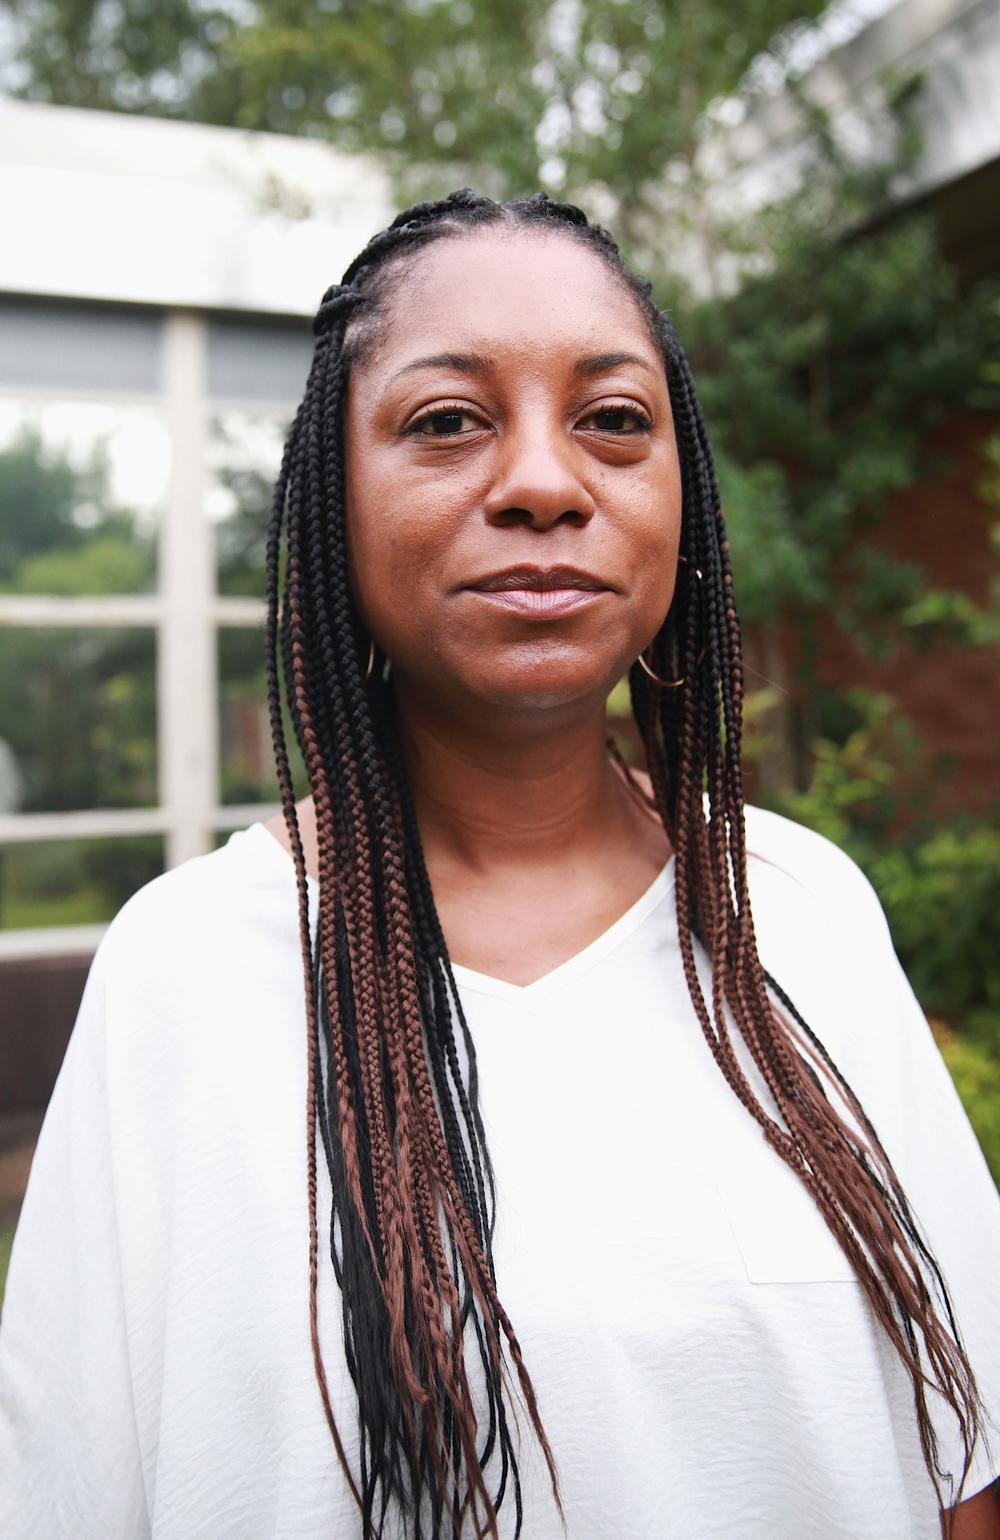 Elementary school counselor Tiffany Johnson set up a grief group for students last year. The district also has a relatively new social-emotional learning program, with teachers starting every day checking in with kids and working with them to name and manage their fears and frustrations.